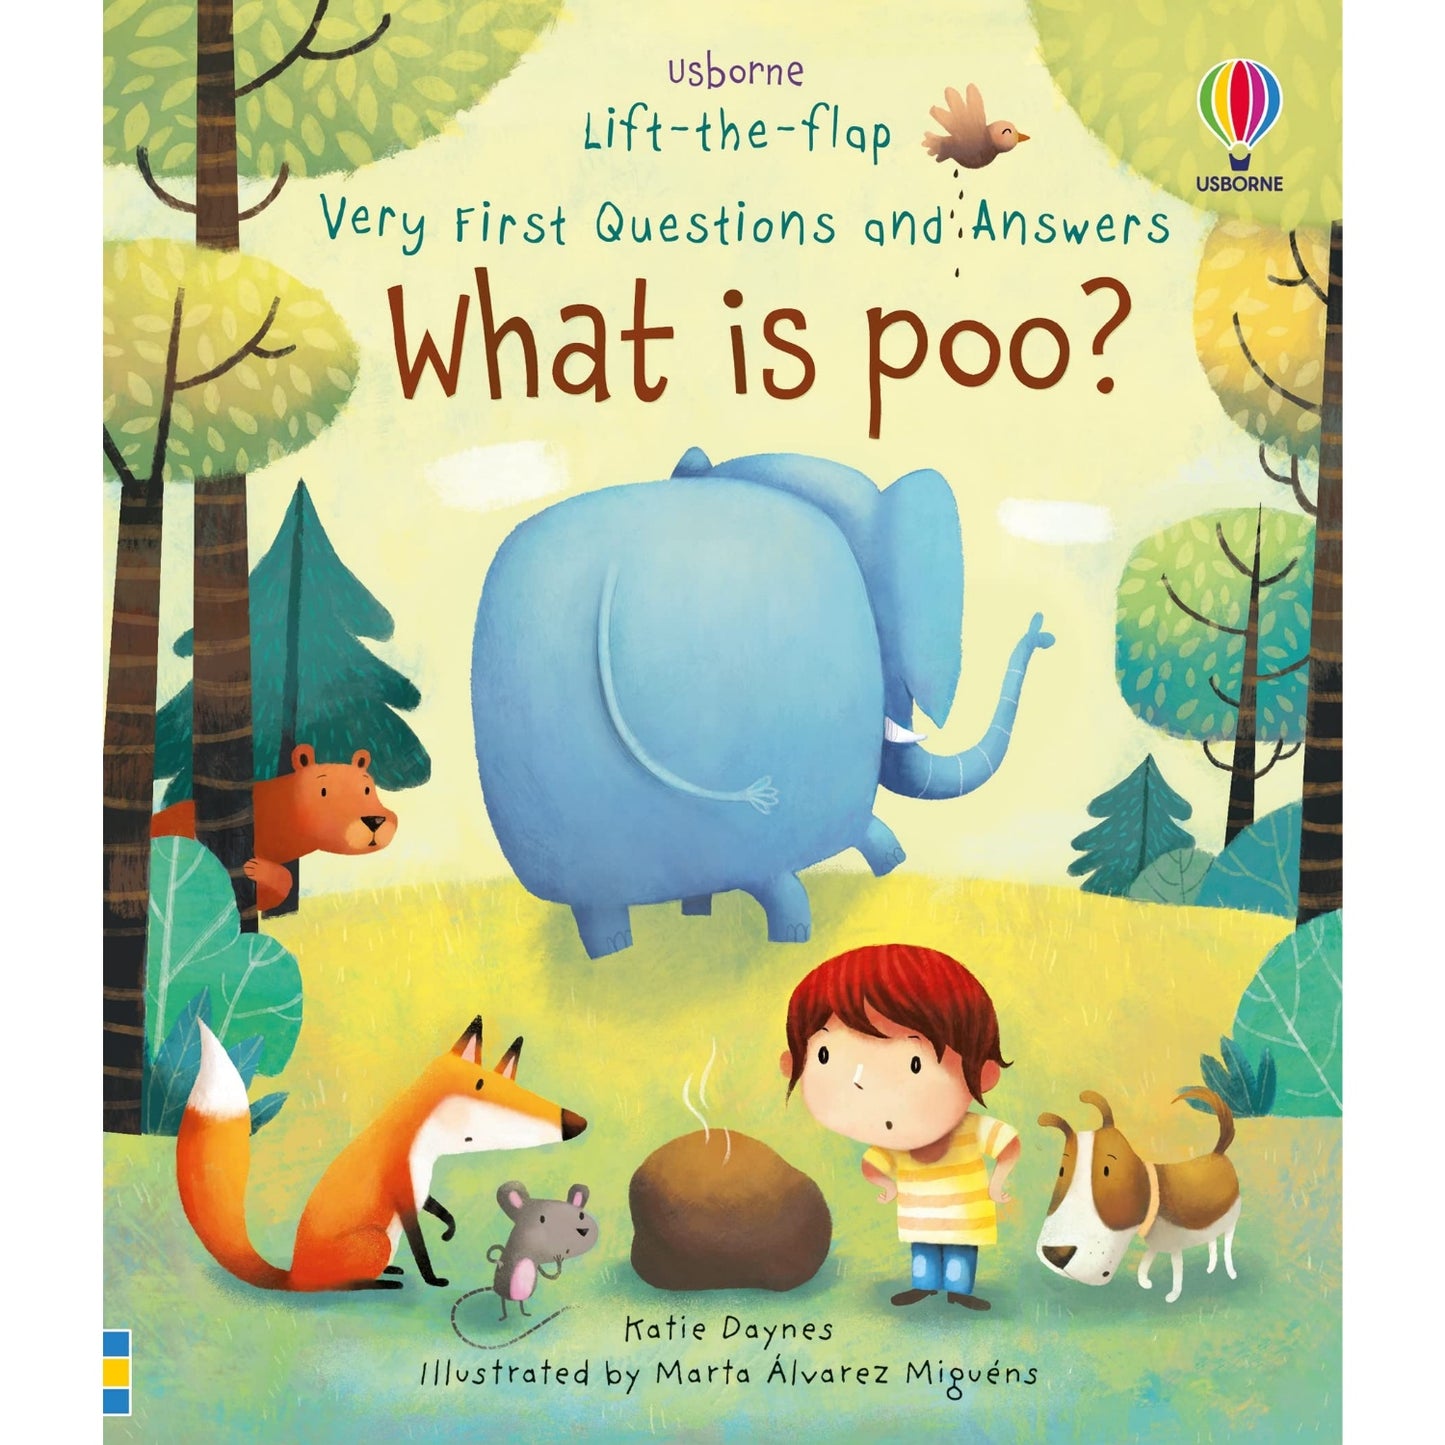 What is Poo? - Very First Questions & Answers Lift-the-Flap Board Book